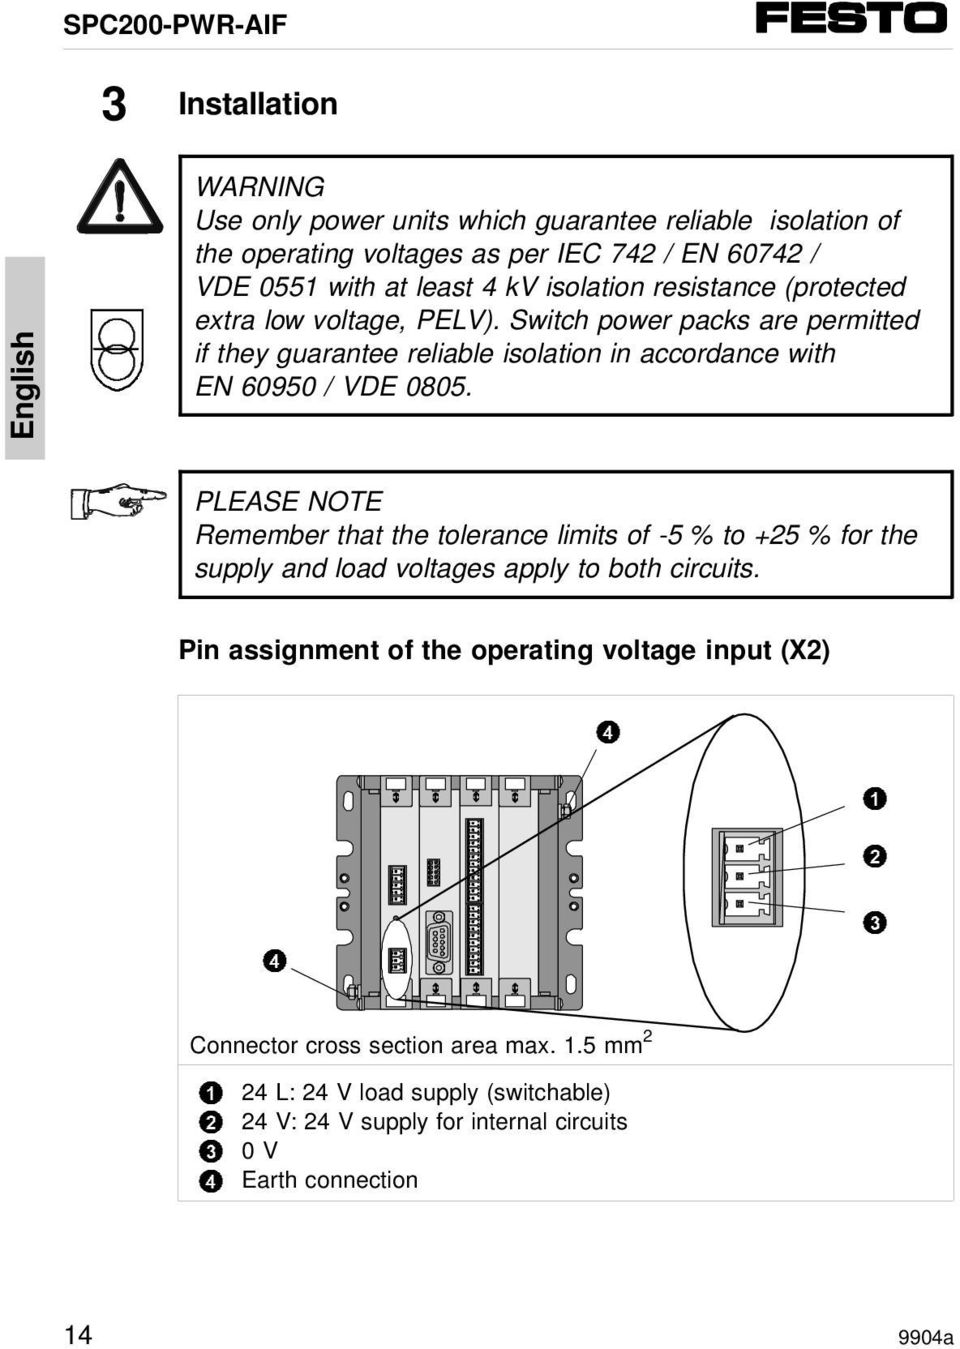 Switch power packs are permitted if they guarantee reliable isolation in accordance with EN 0950 / VDE 0805.